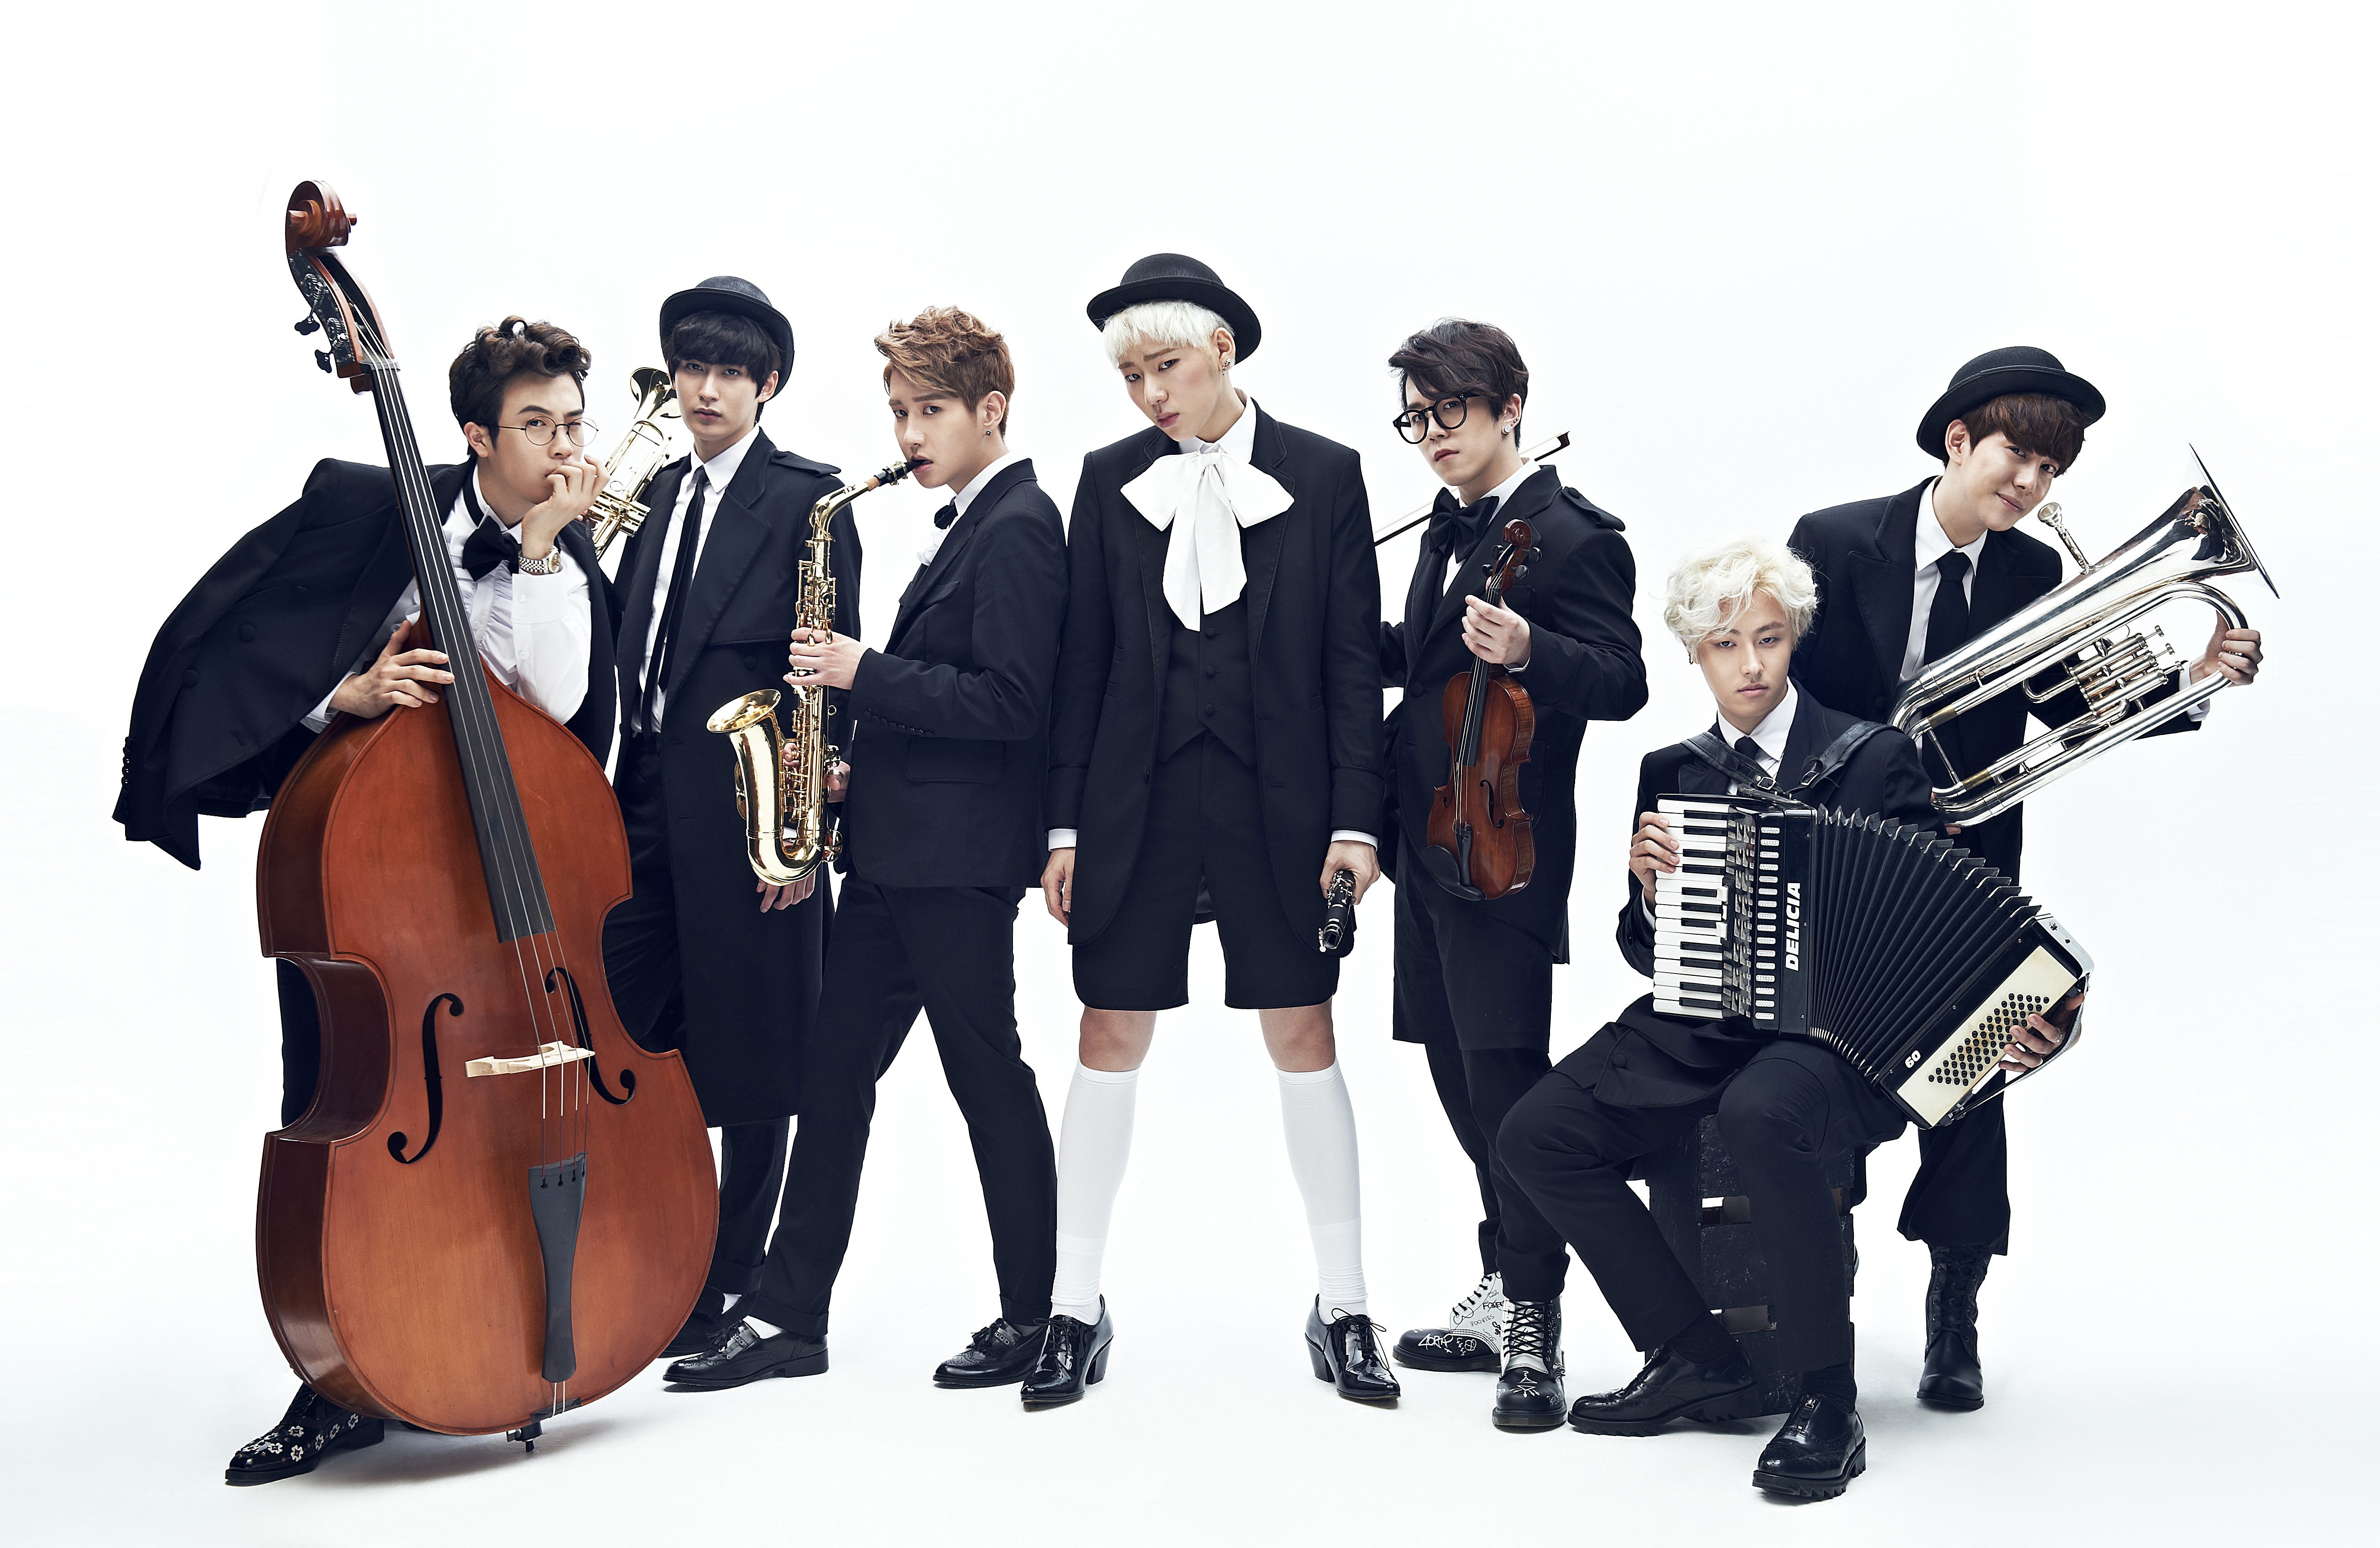 People 5216x3393 Asian music Group of Men studio white background musical instrument men boy bands